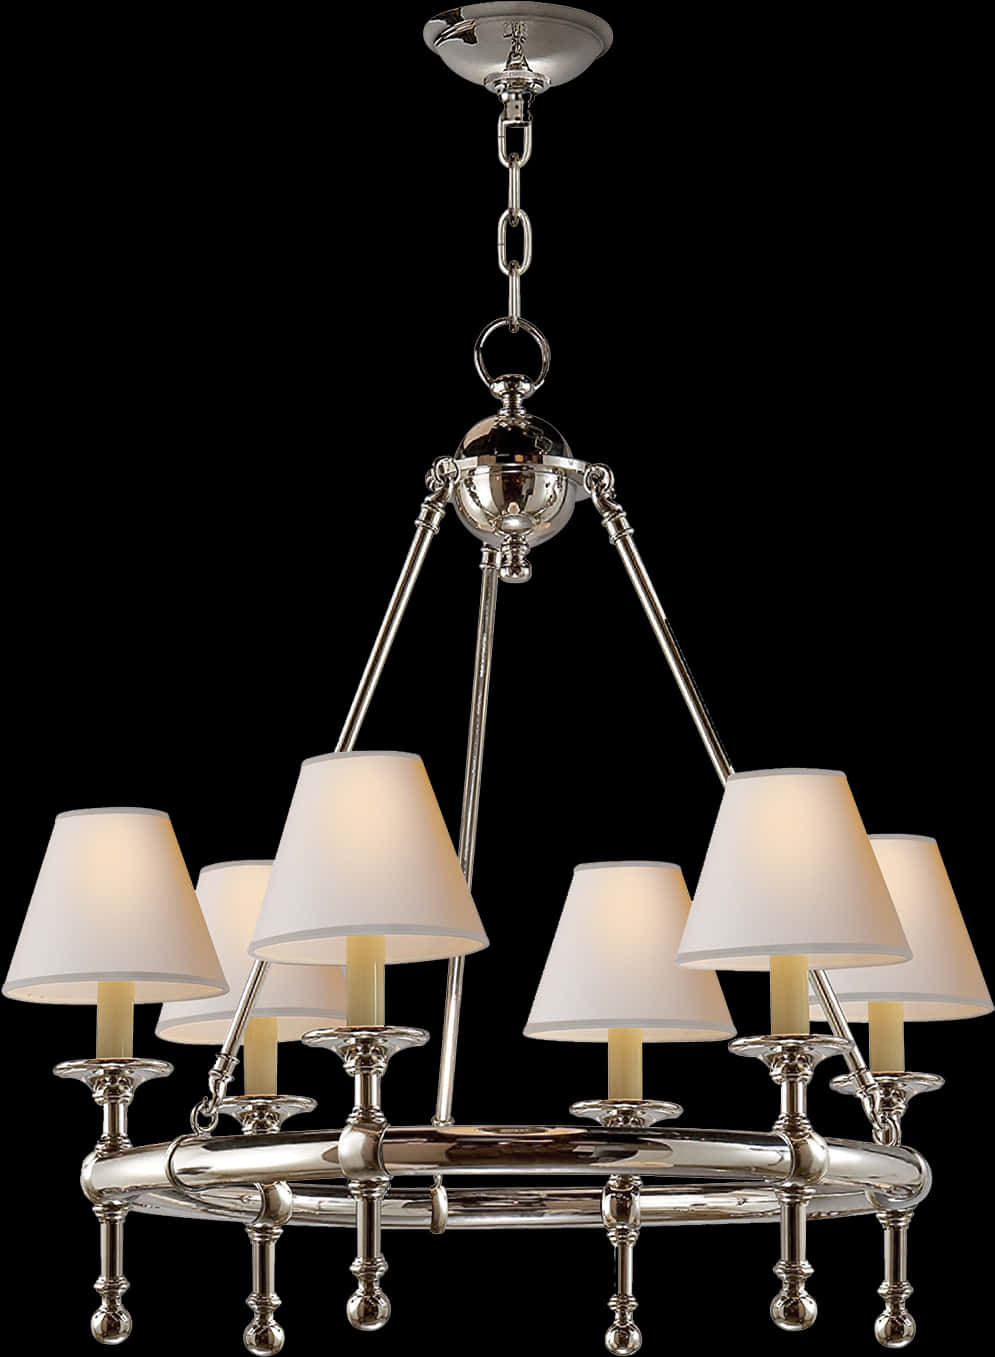 A Chandelier With White Lamps